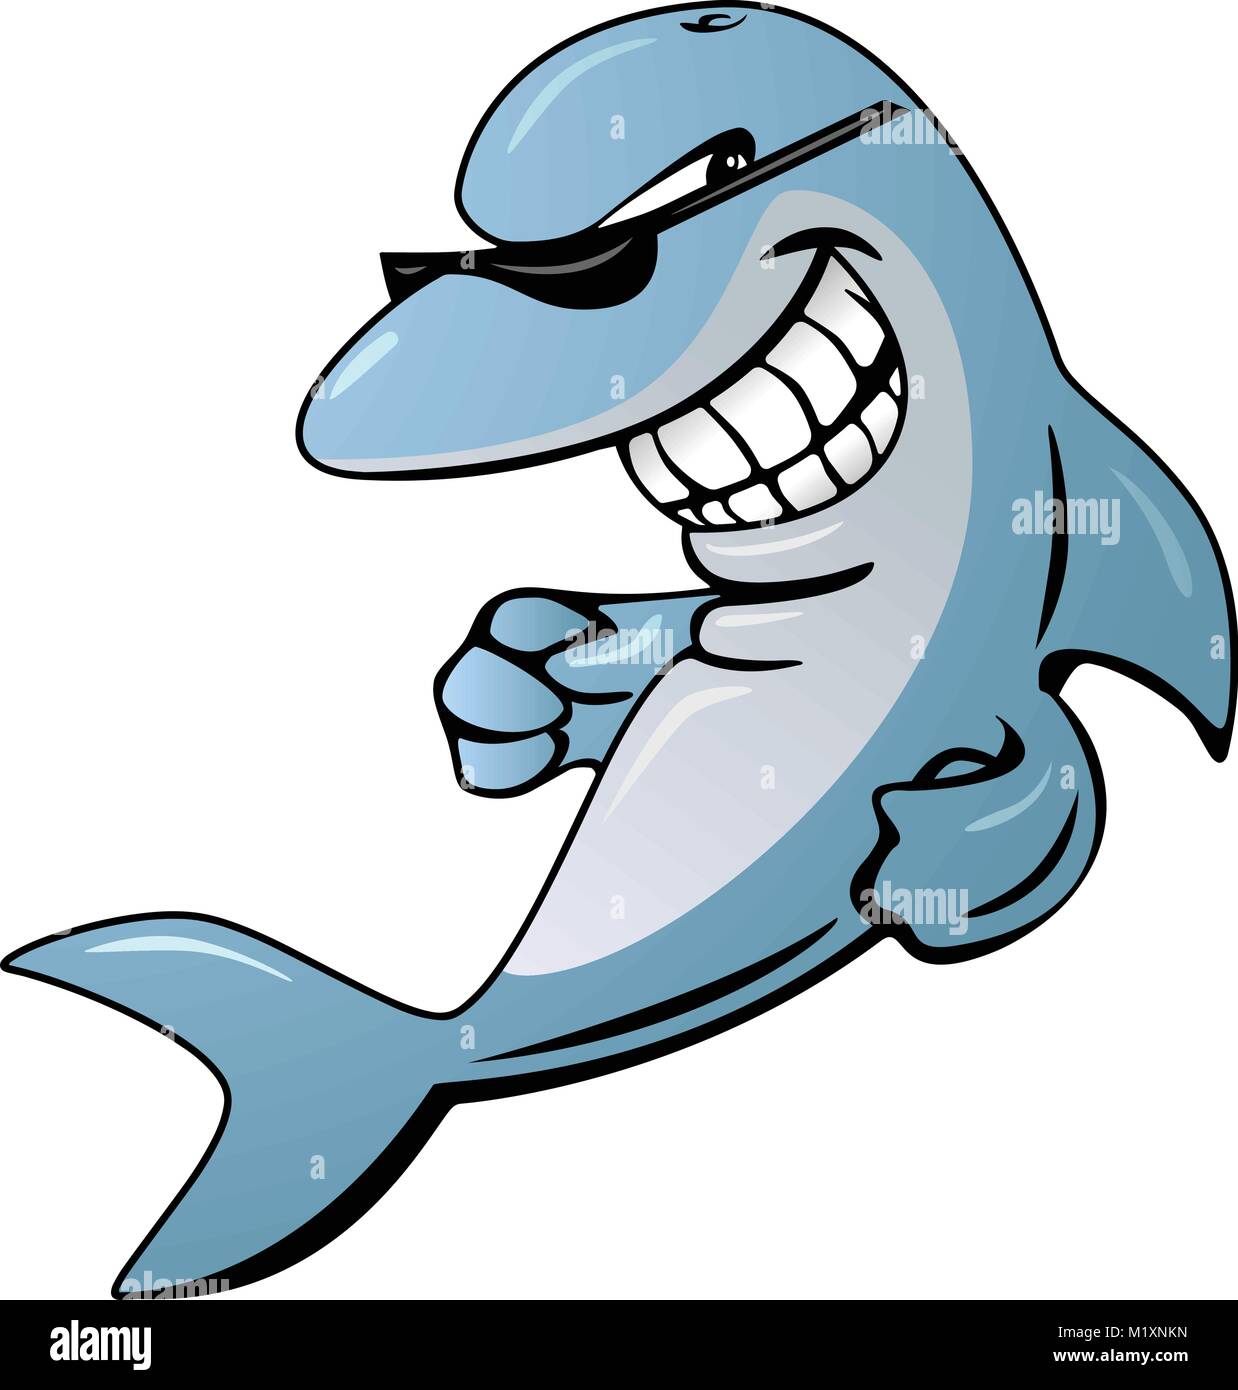 Cool Dolphin Cartoon Character Vector Graphic Illustration Stock Vector